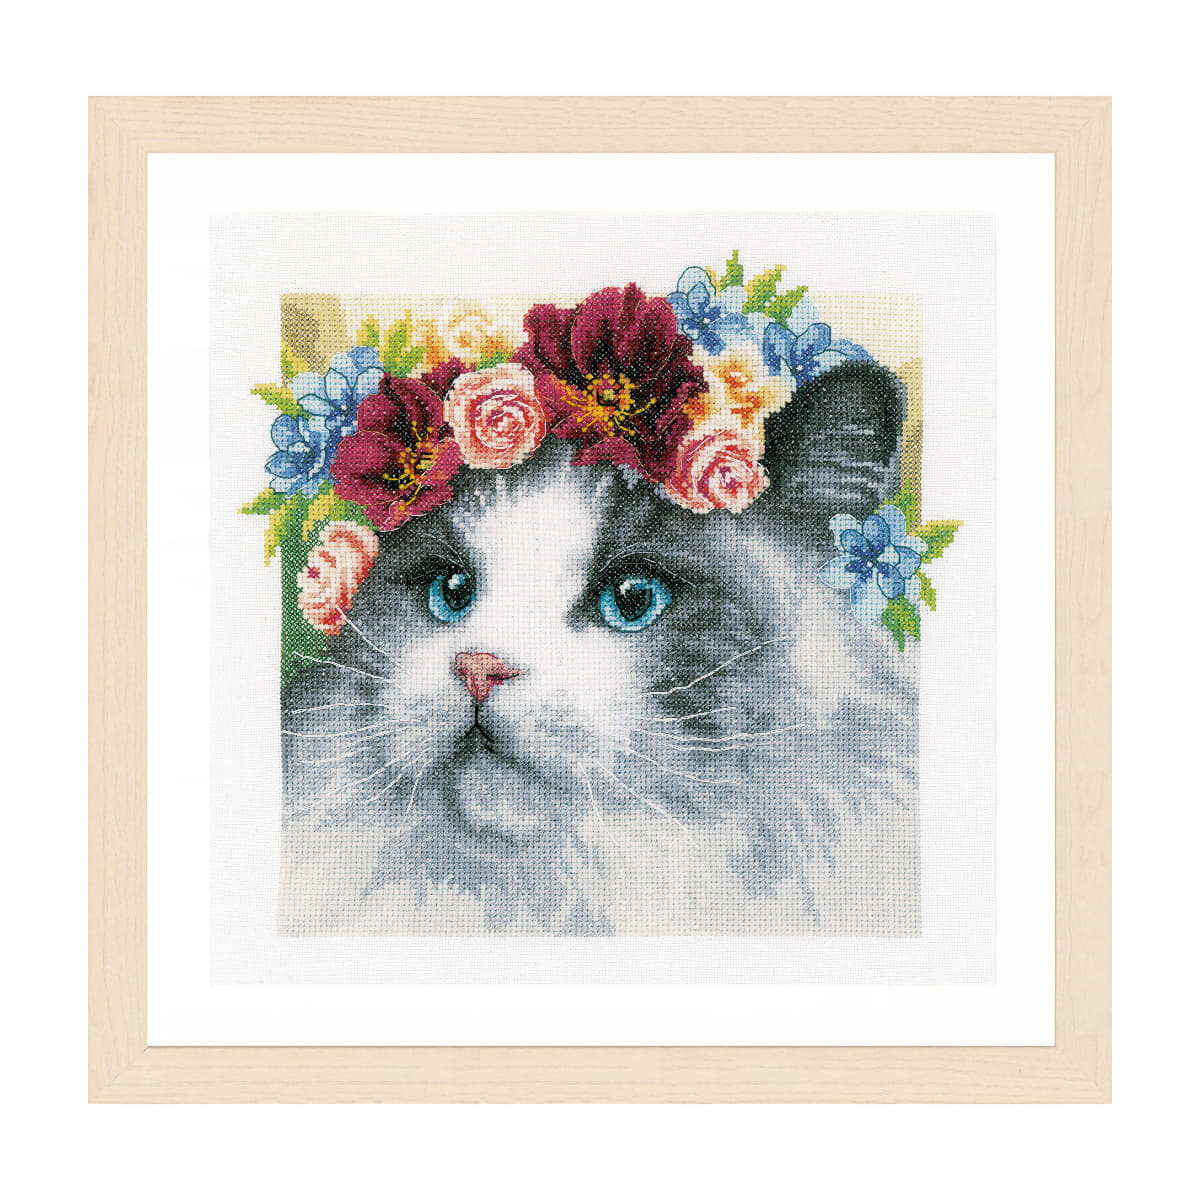 A Lanarte embroidery pack featuring a white and grey cat...